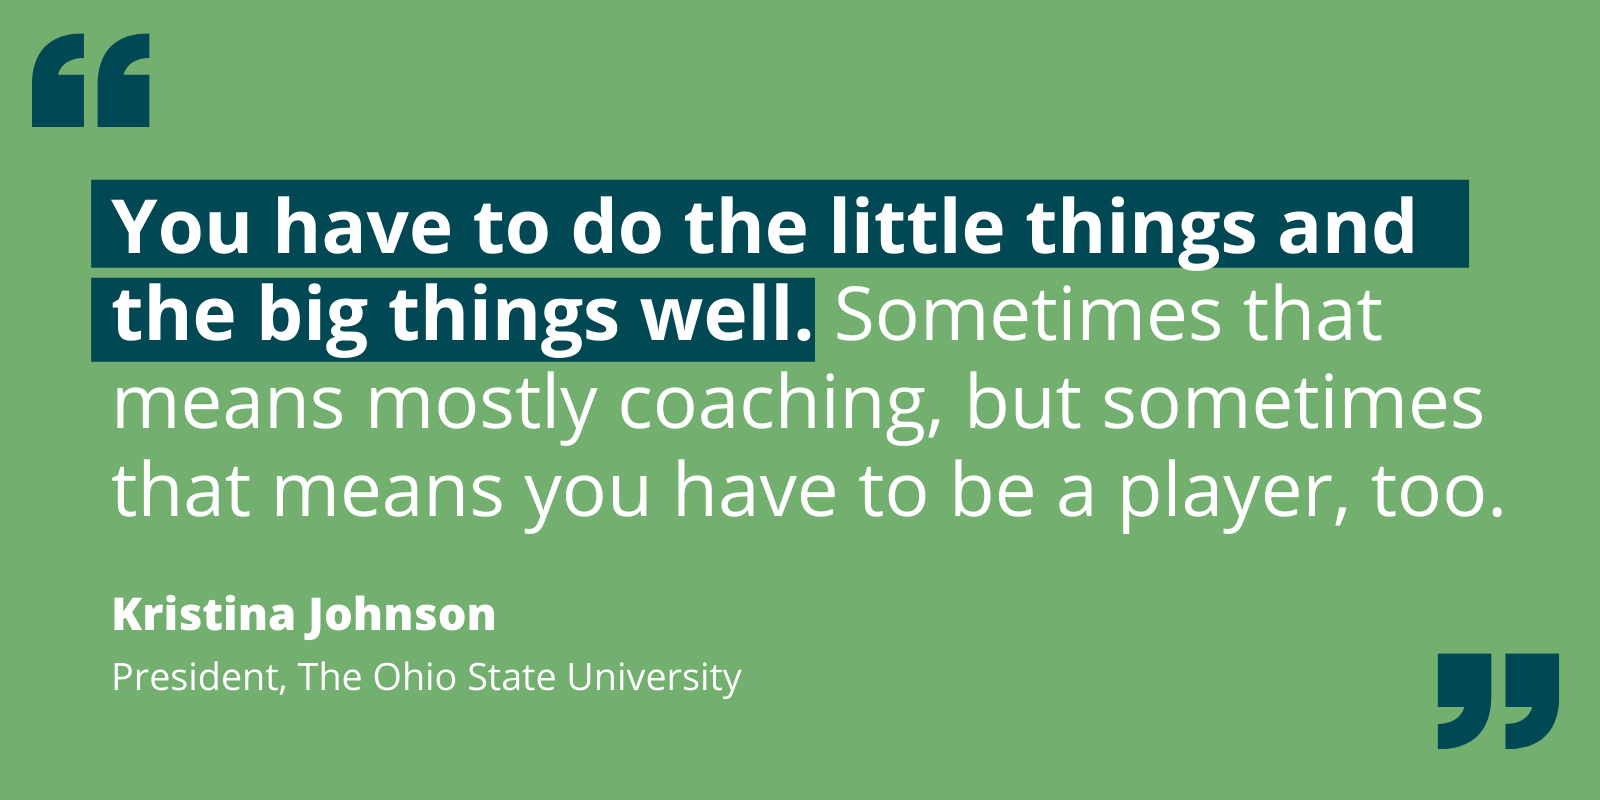 Quote by Kristina Johnson re: a leader's ability to do both big and little things, being a player as well as the coach.